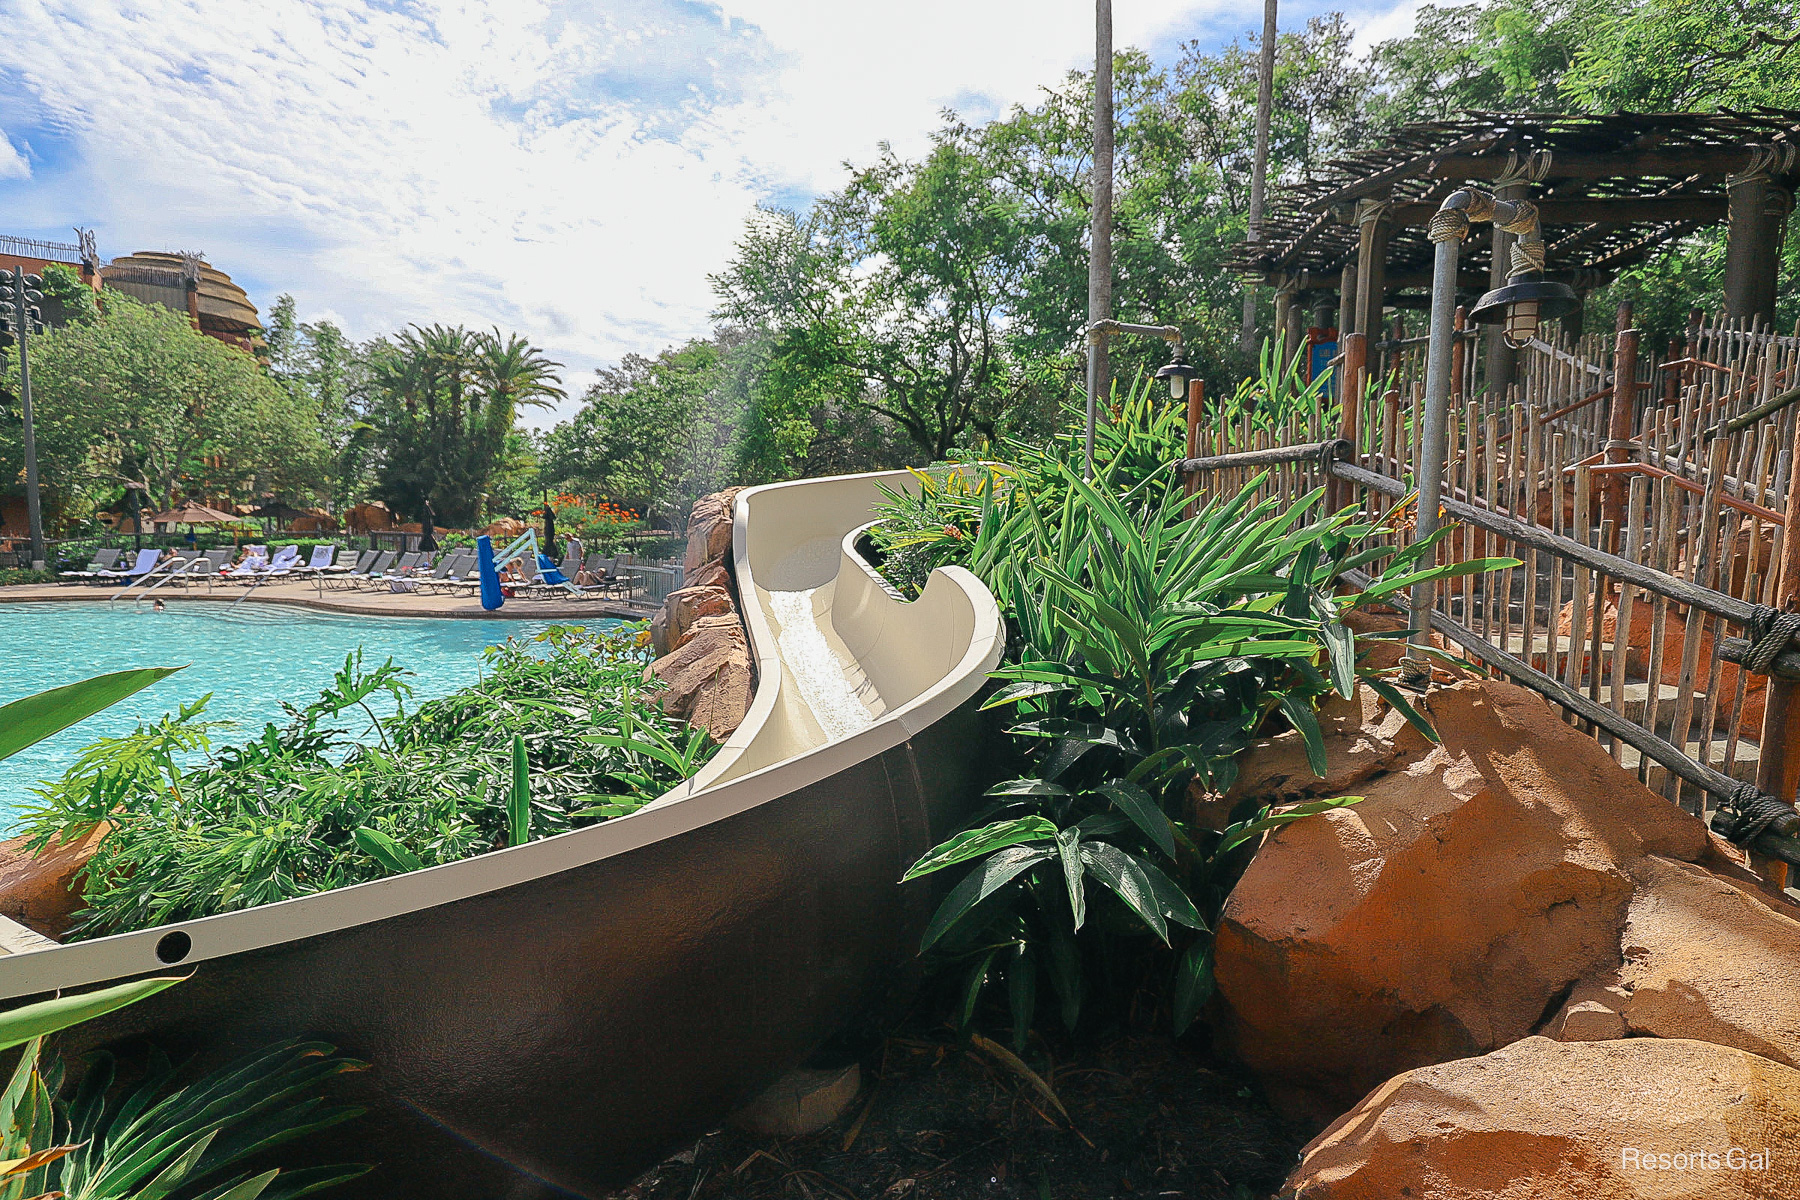 the gentle curve of the water slide sitting amongst rocks and landscaping 